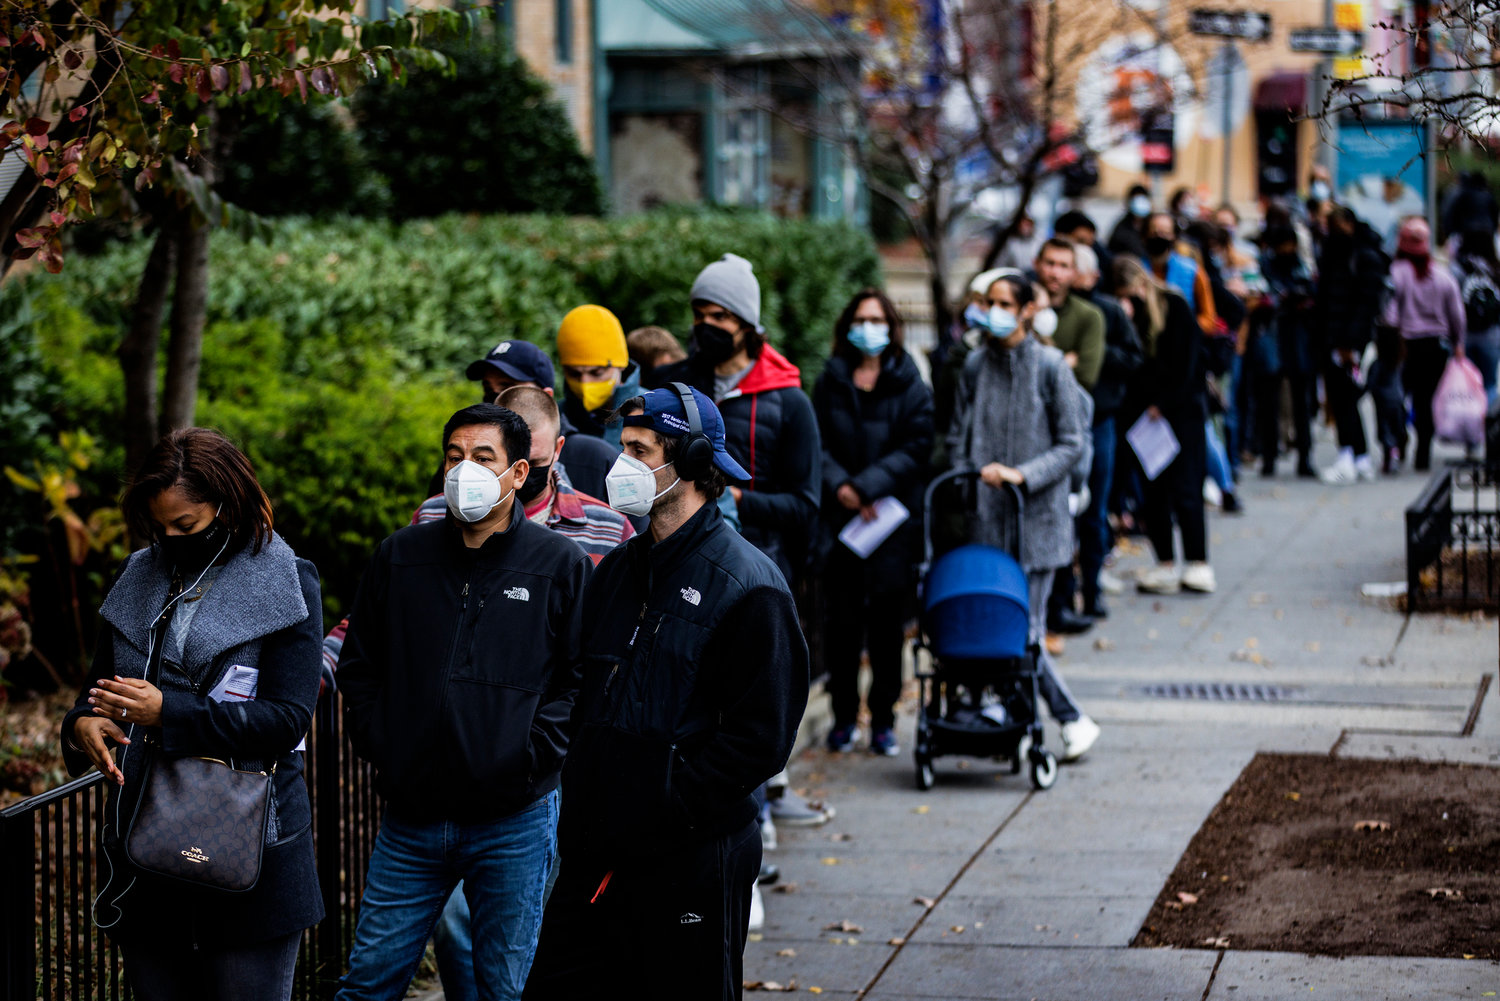 People line up outside of a free COVID-19 just-opened vaccination site in the Hubbard Place apartment building on Friday, Dec. 3, 2021, in Washington, D.C. Experts are hoping the pandemic, with its omicron outbreak, will fade and become endemic in 2022.(Samuel Corum/Getty Images/TNS)